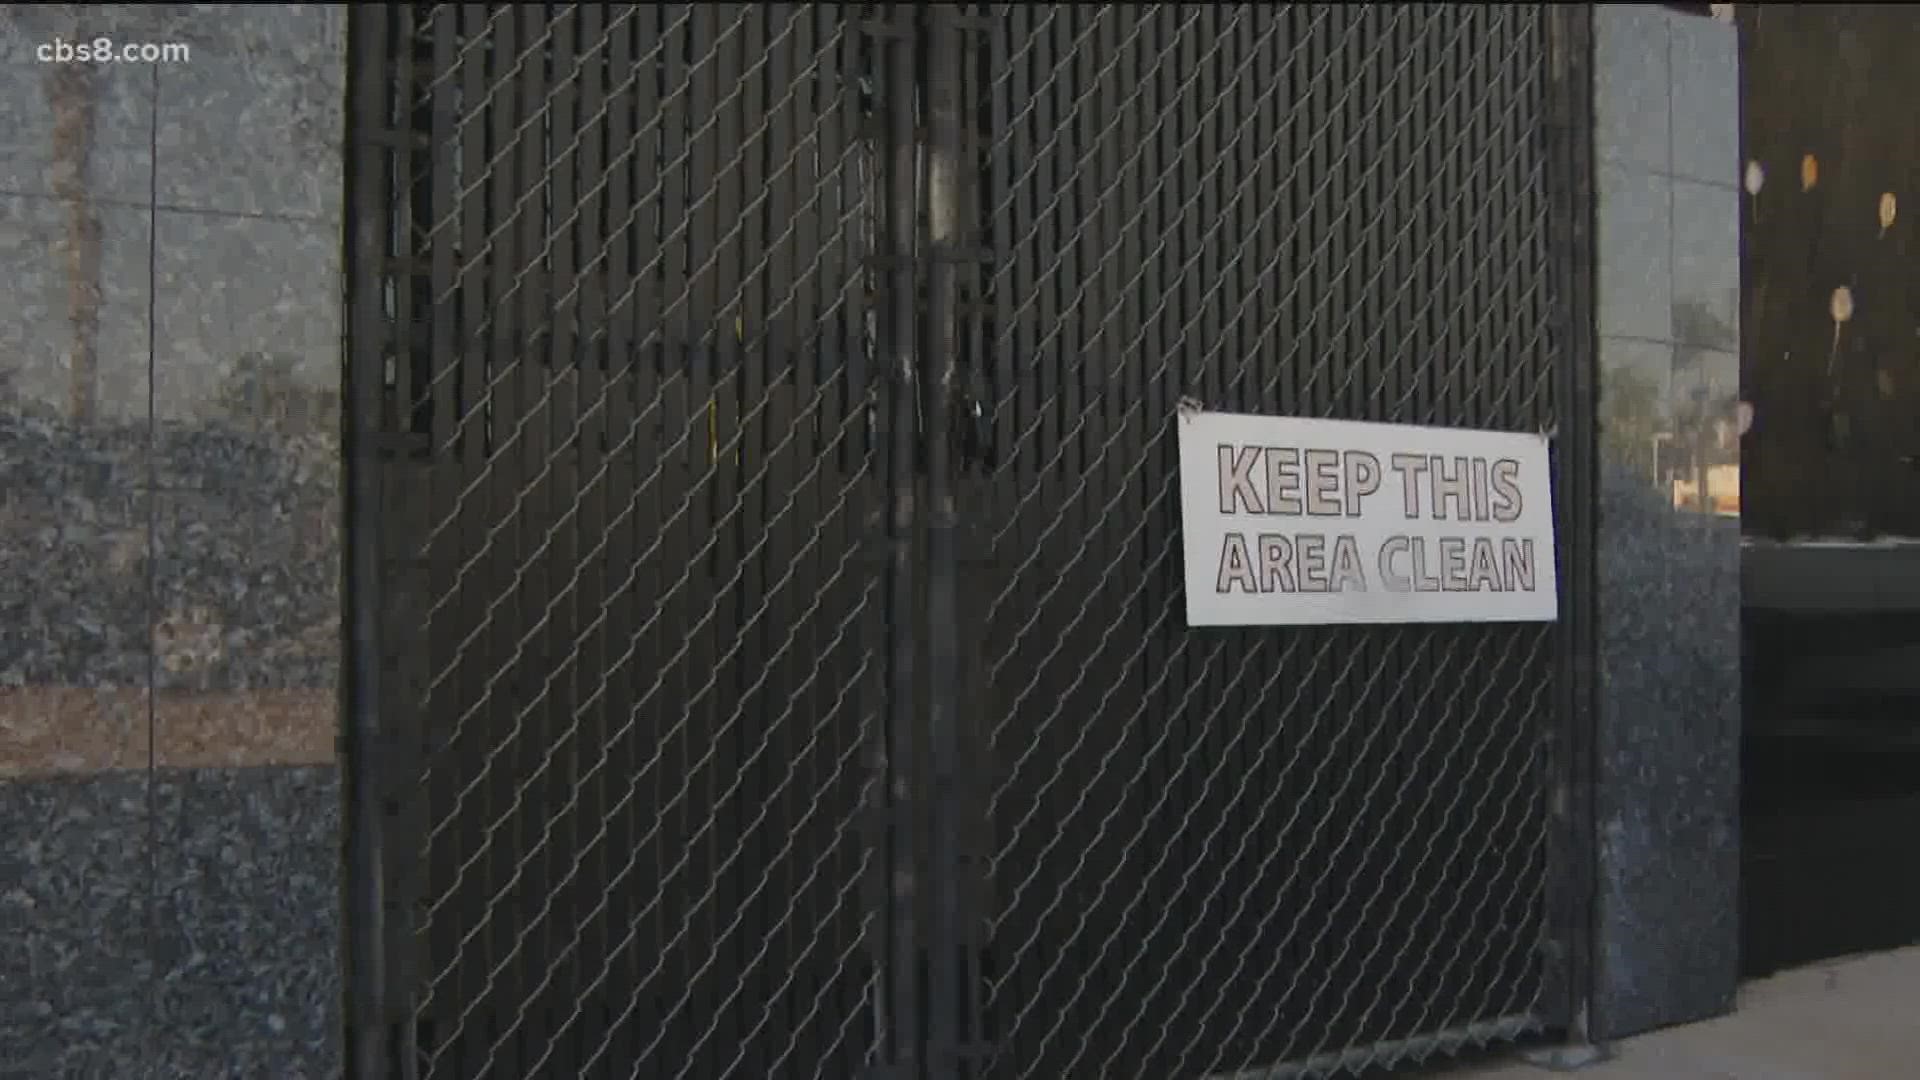 A former San Diego strip club will become a resource center for sex trafficking victims